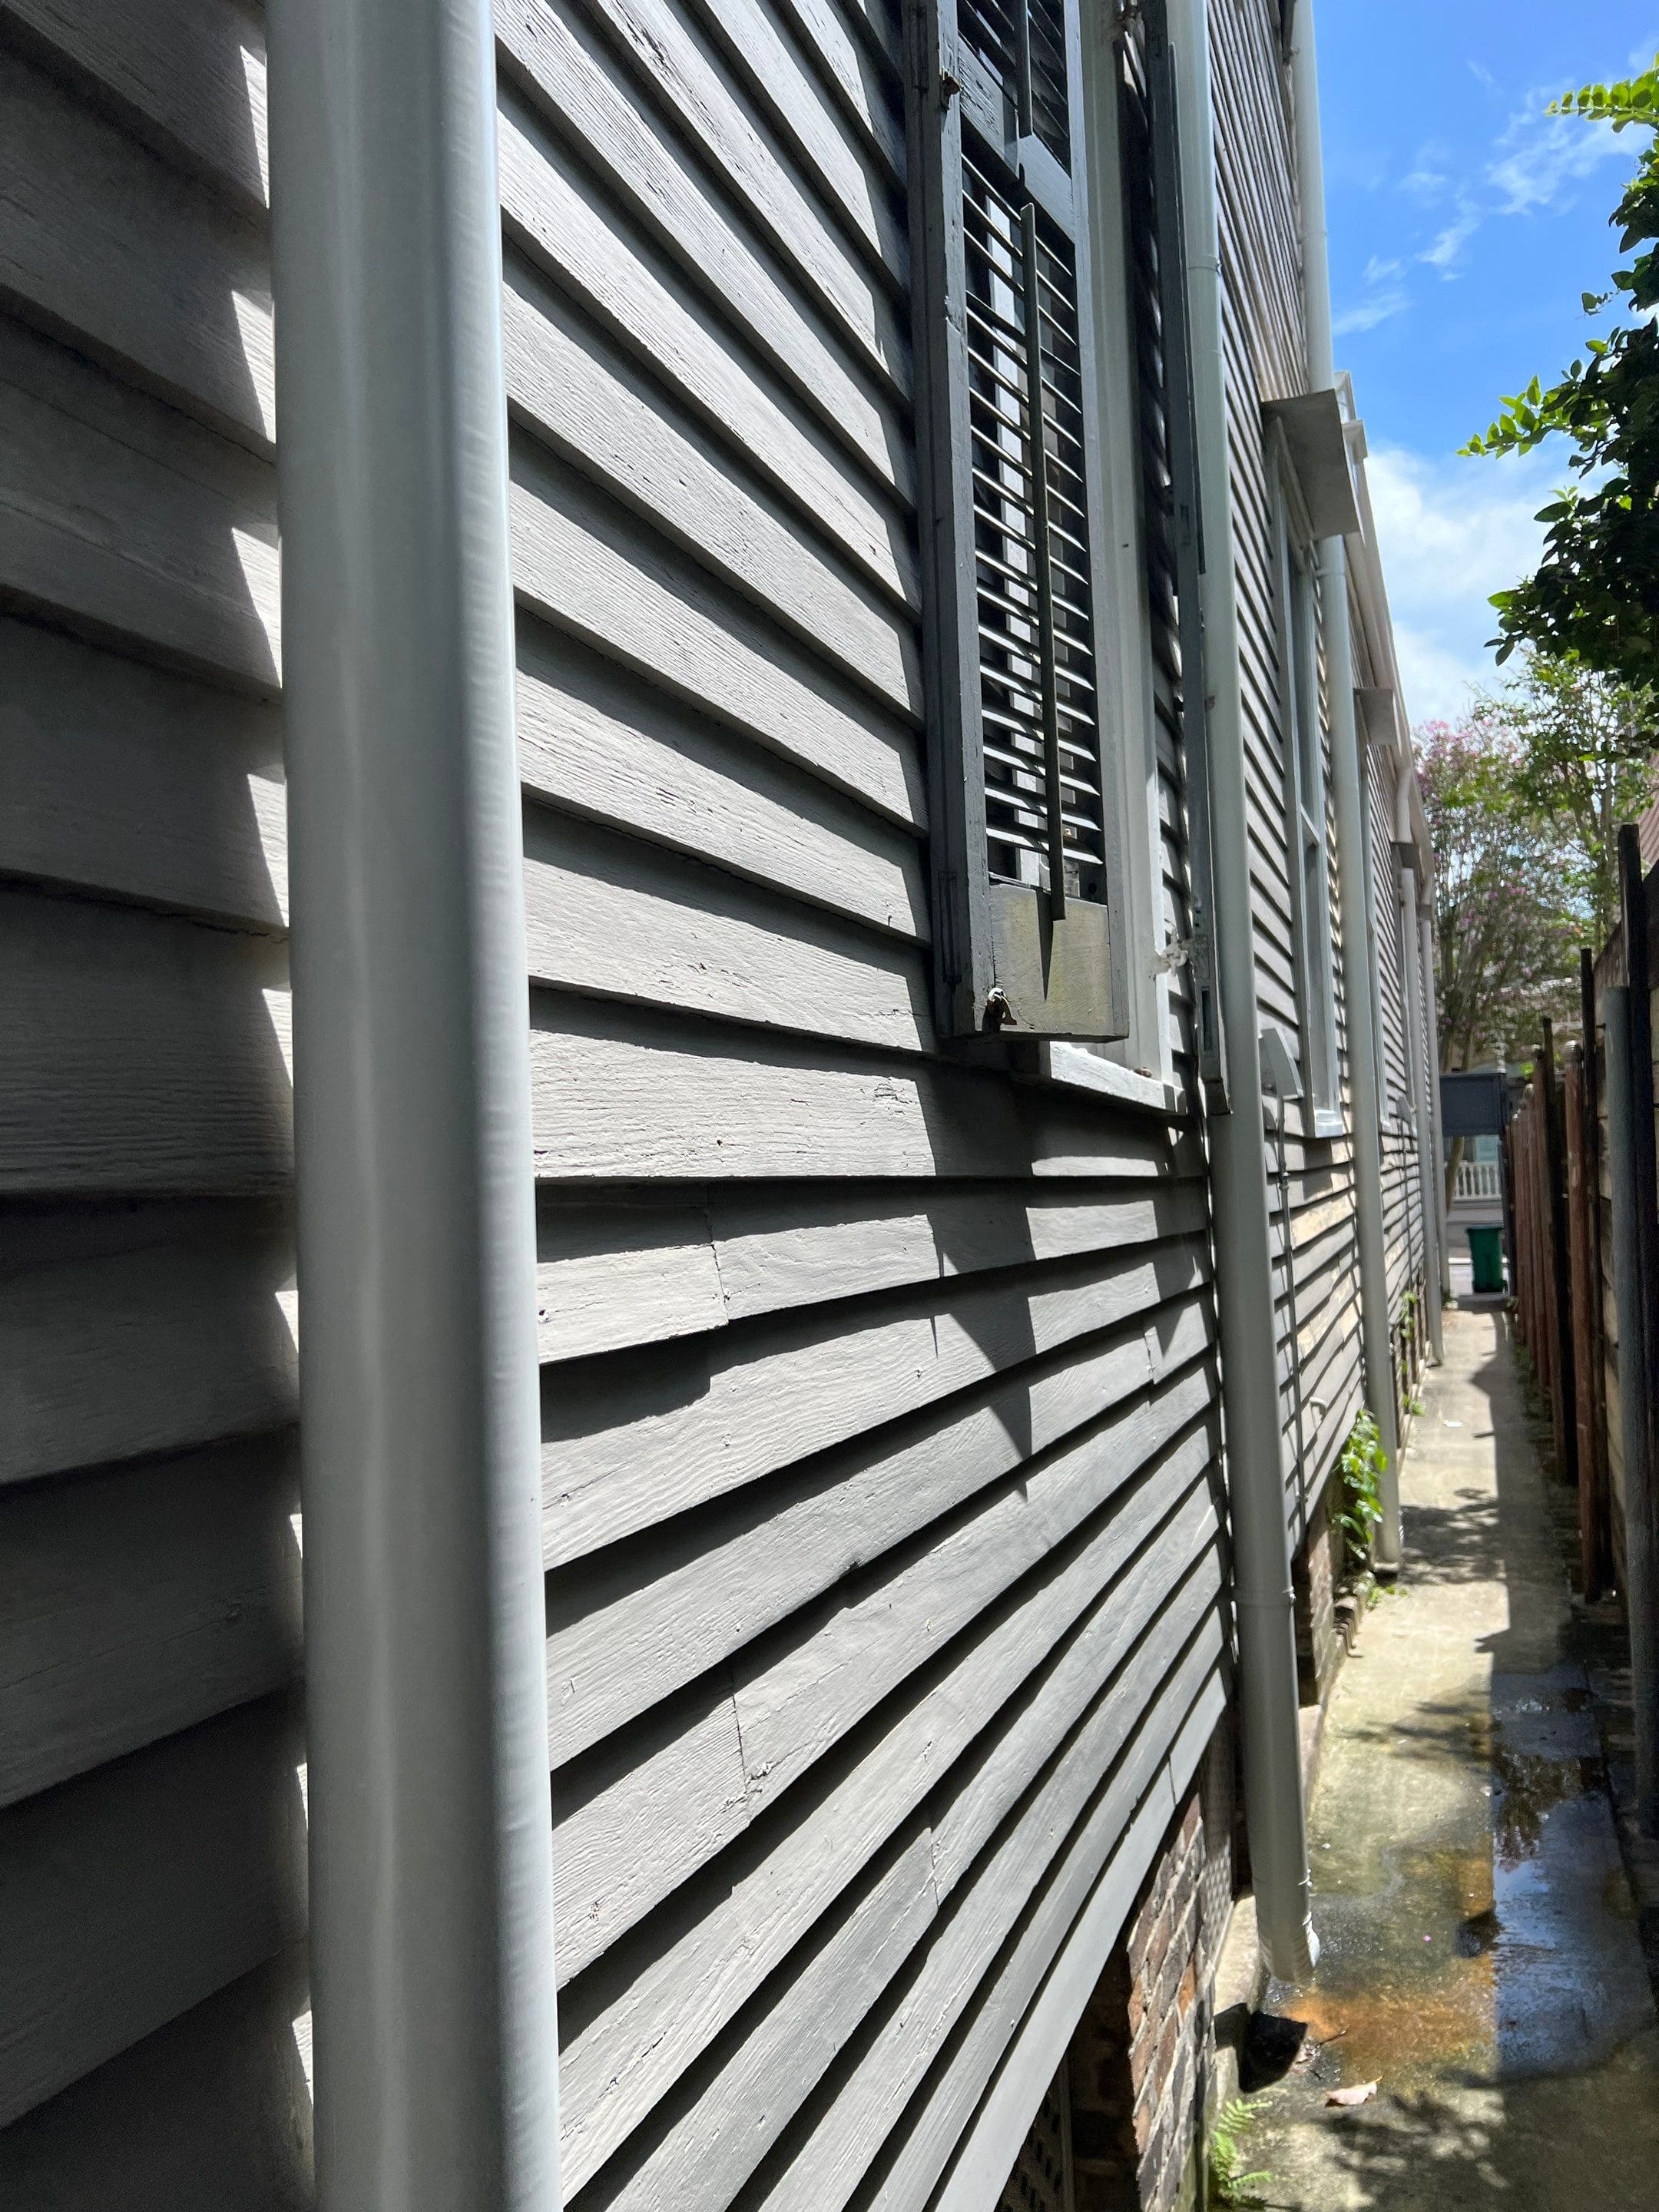 Gutter Systems in New Orleans